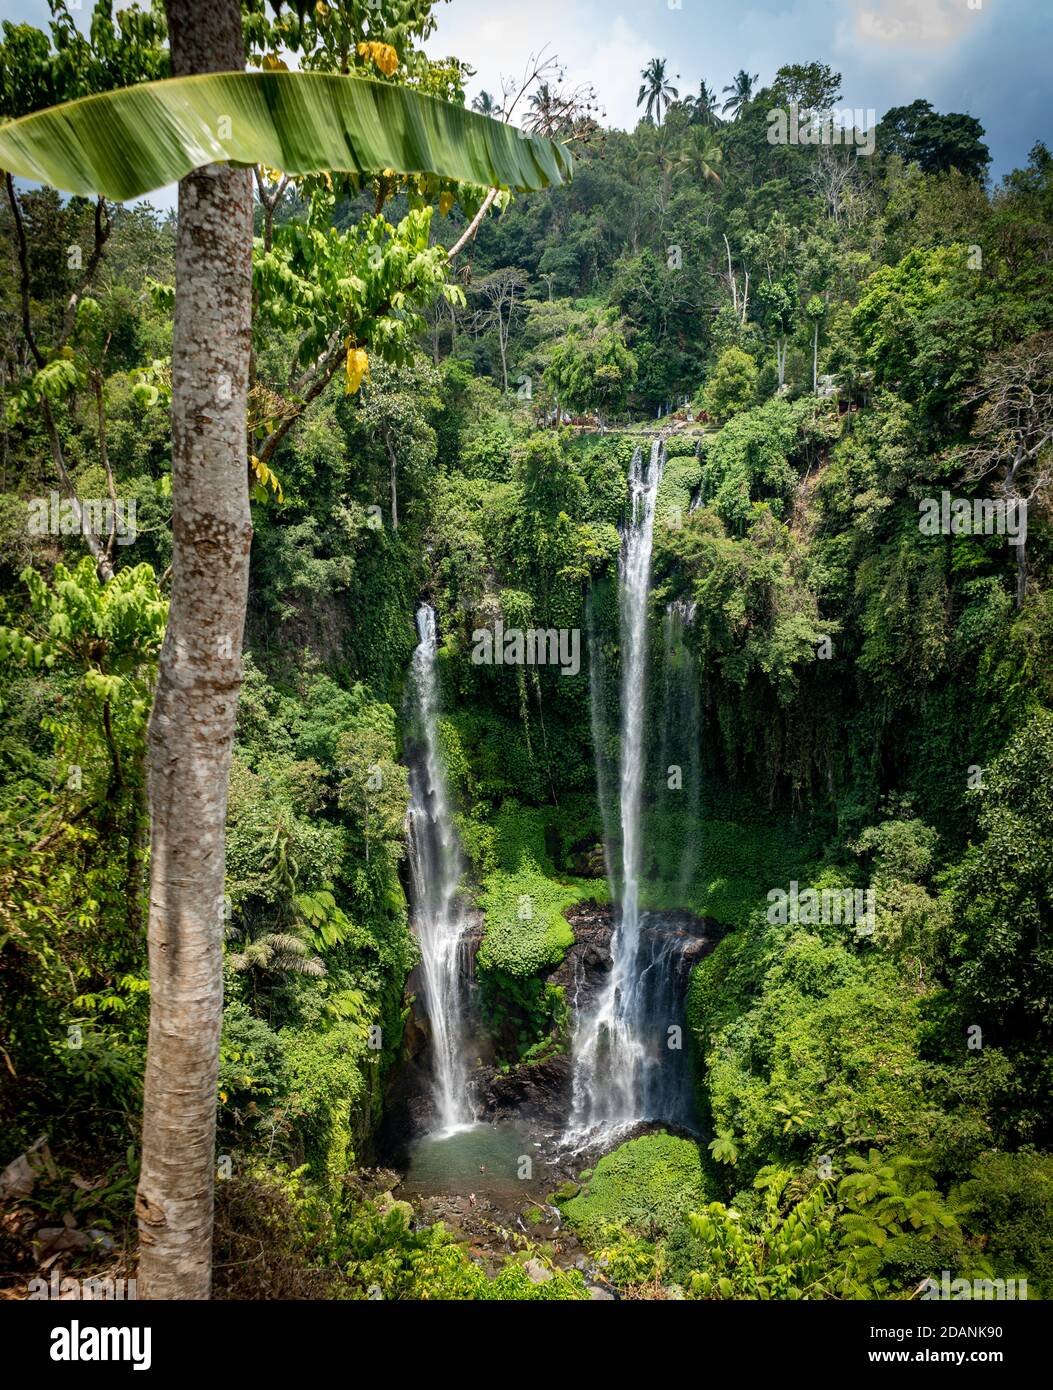 high waterfall in deep forest Stock Photo